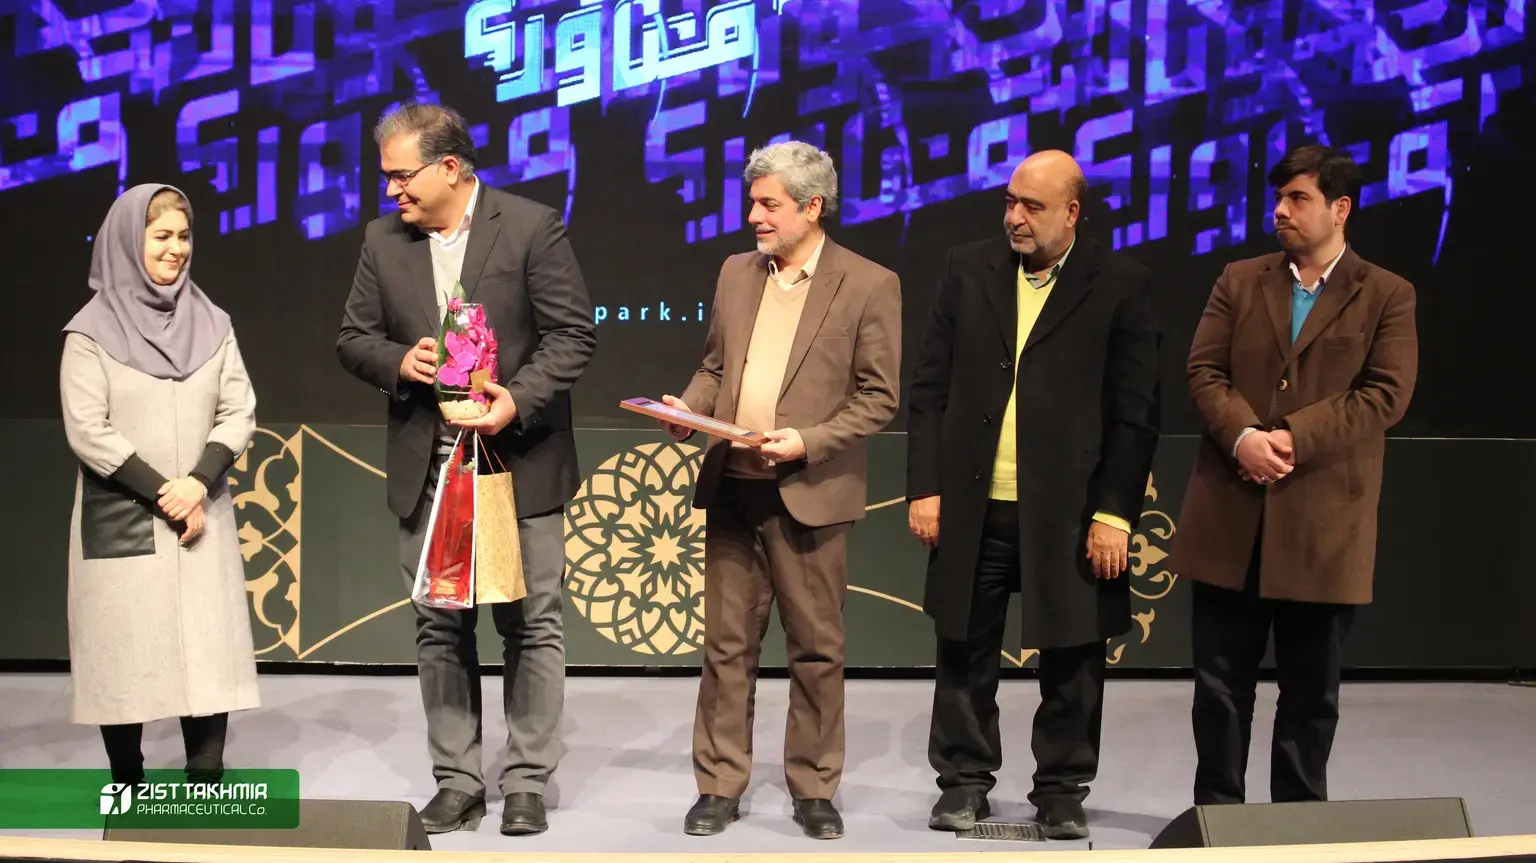 Dr. Nazari's recognition ceremony as the top specialist of the Technology Park